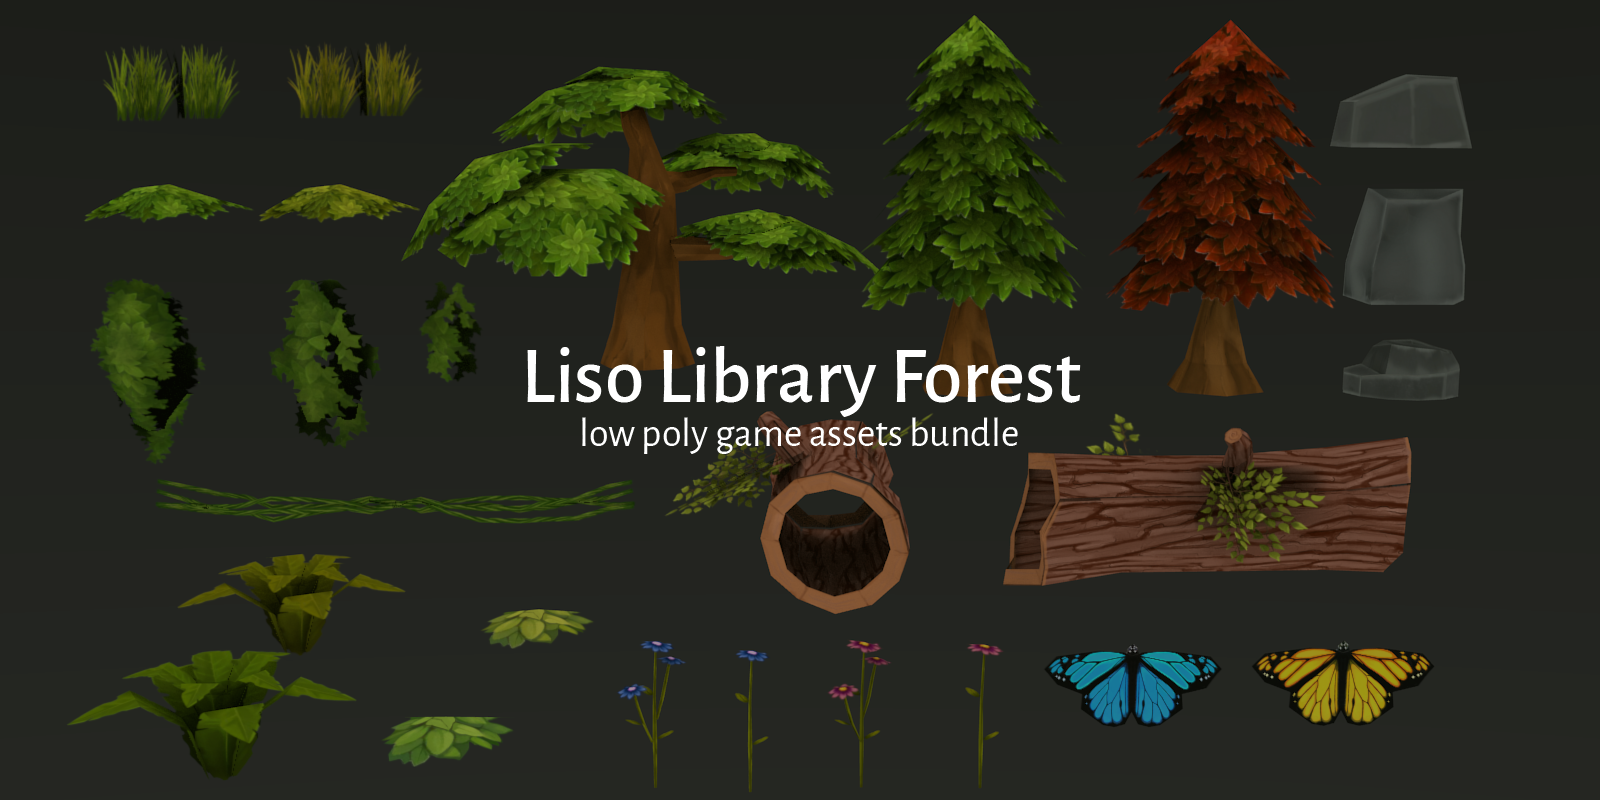 Liso Library Forest